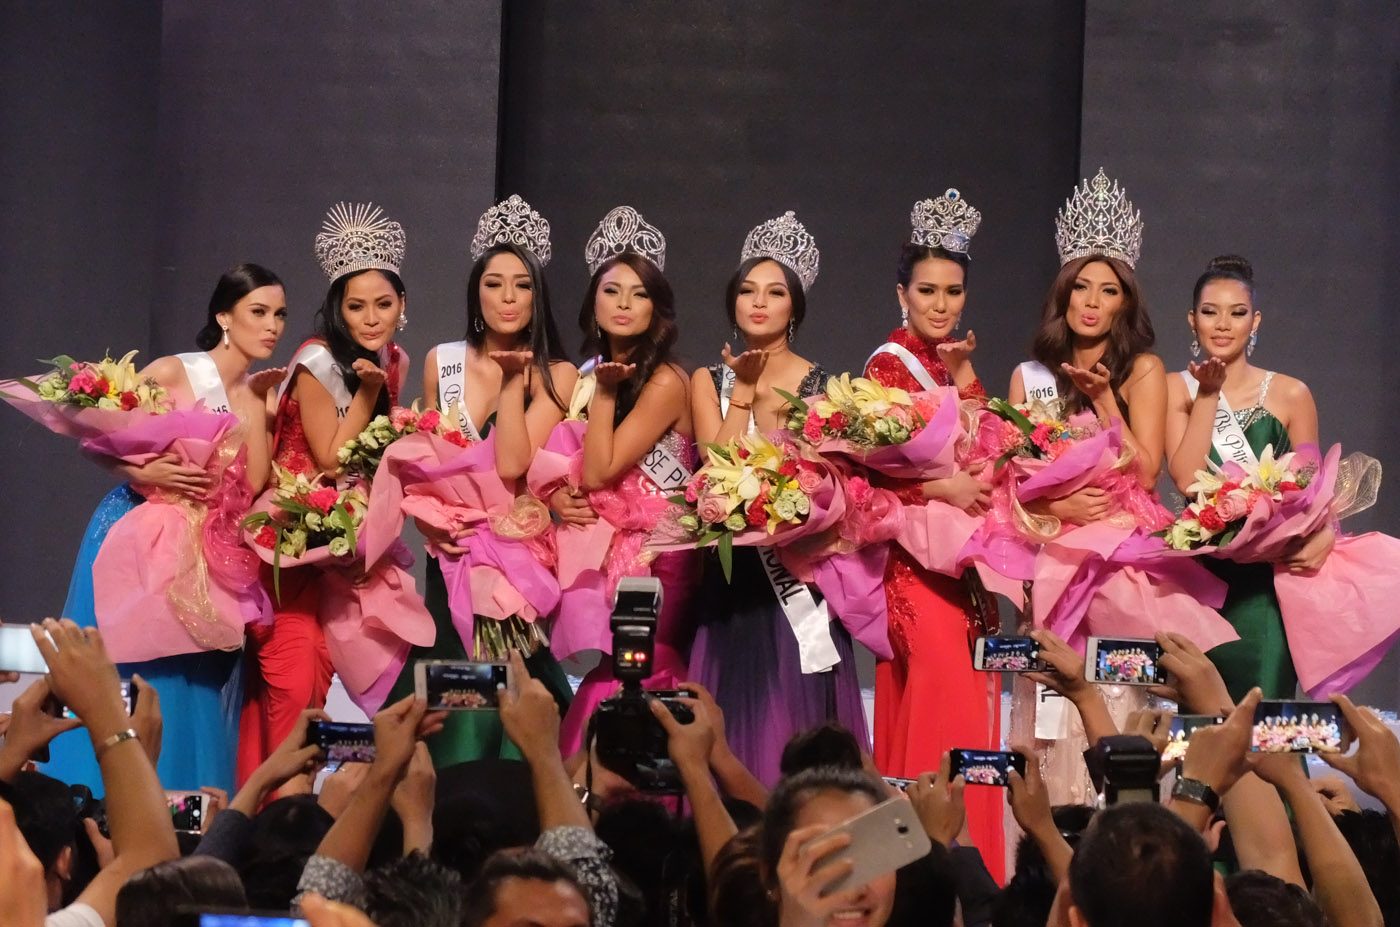 What’s next for the Bb Pilipinas 2016 queens